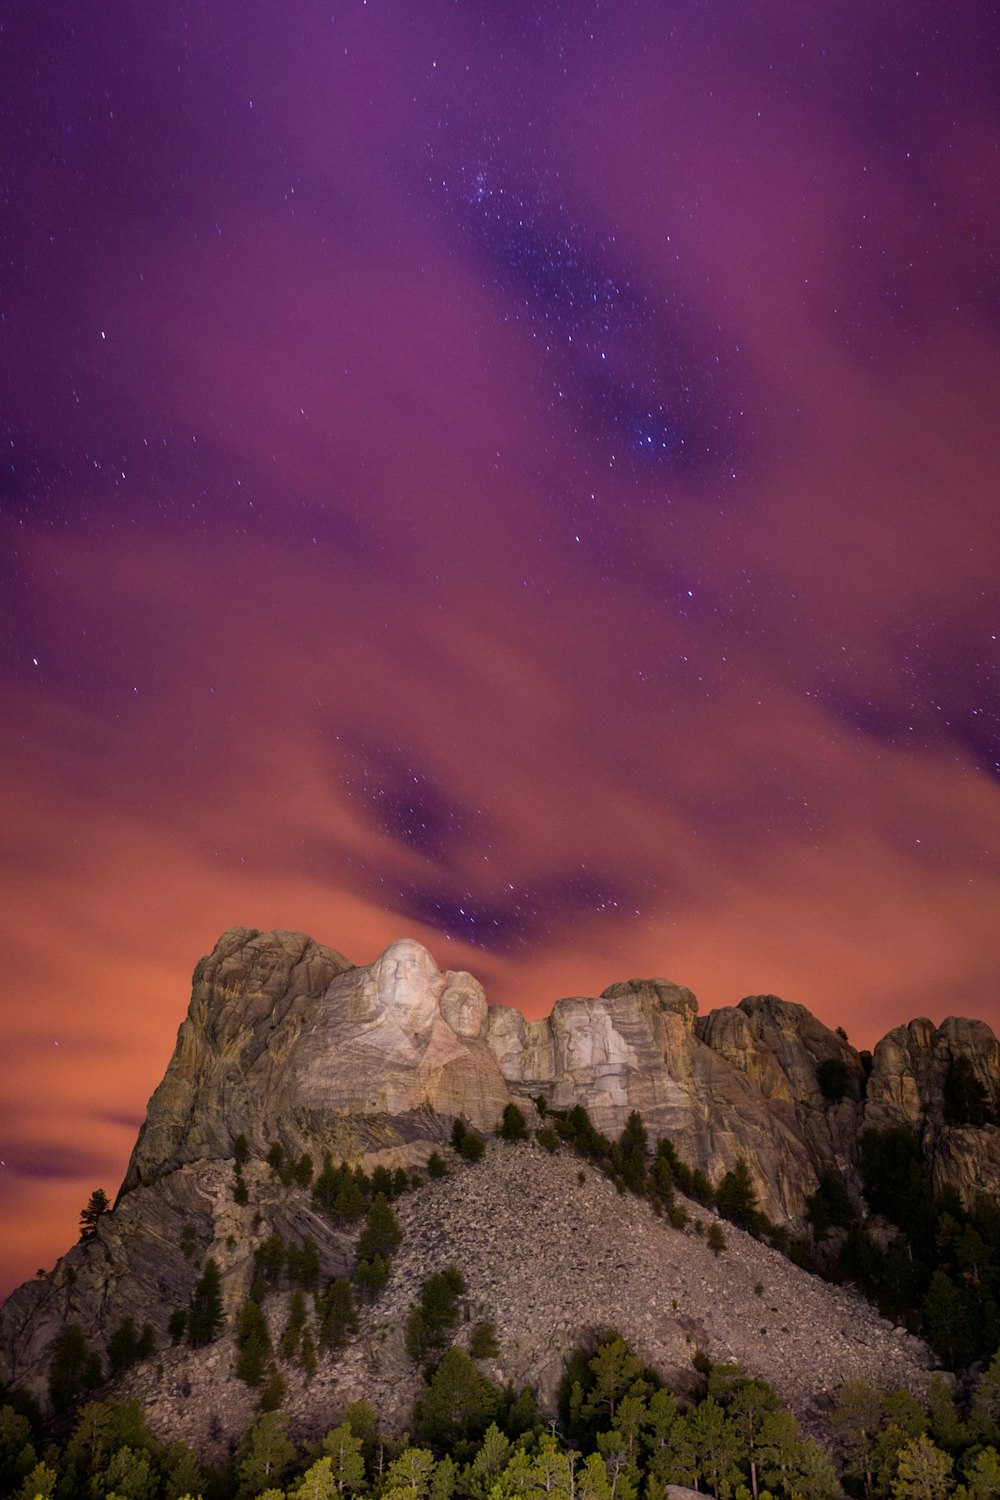 The Stars peak through the clouds at Mount Rushmore